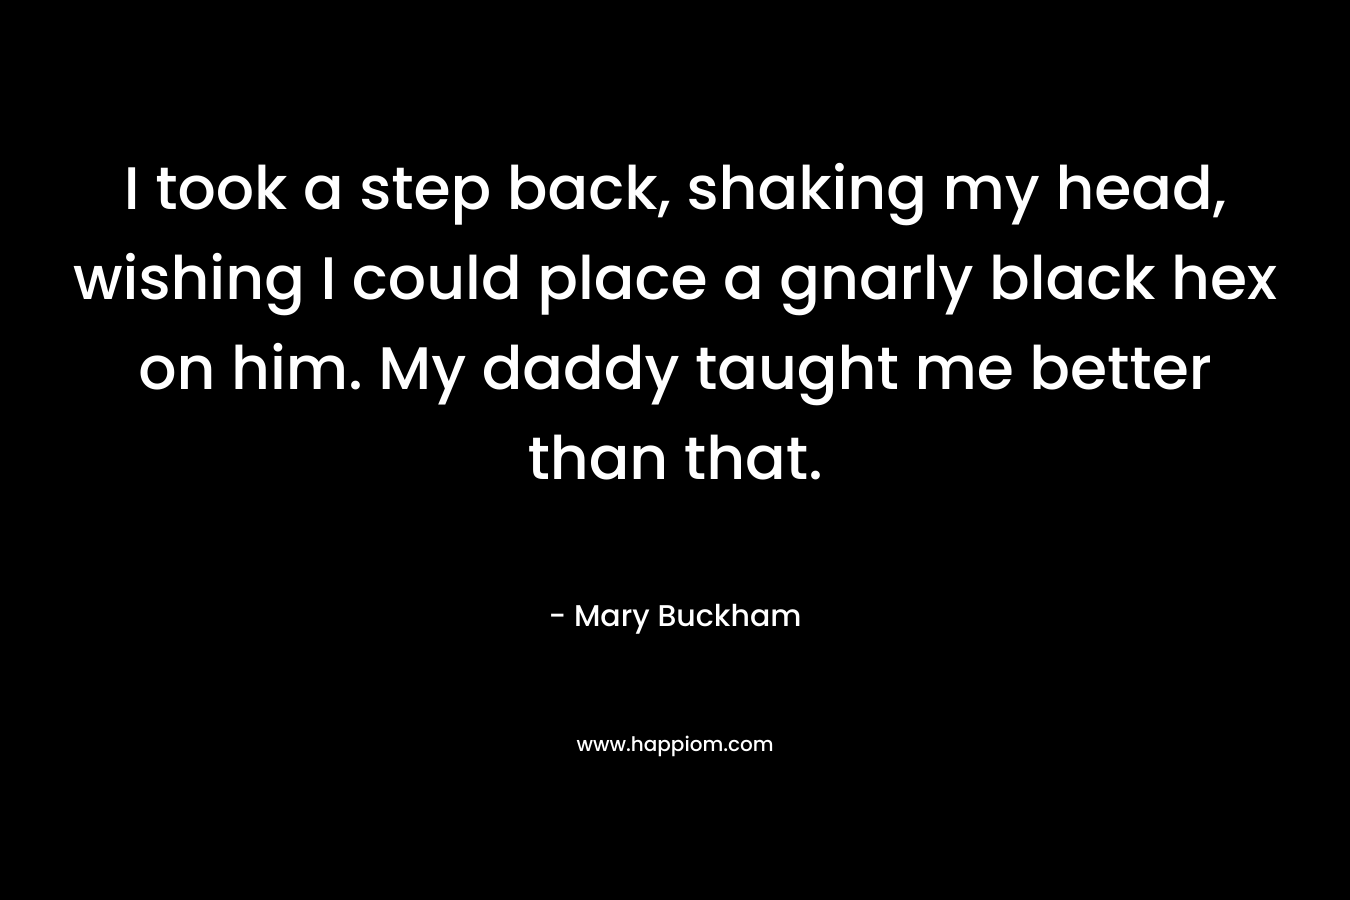 I took a step back, shaking my head, wishing I could place a gnarly black hex on him. My daddy taught me better than that. – Mary Buckham